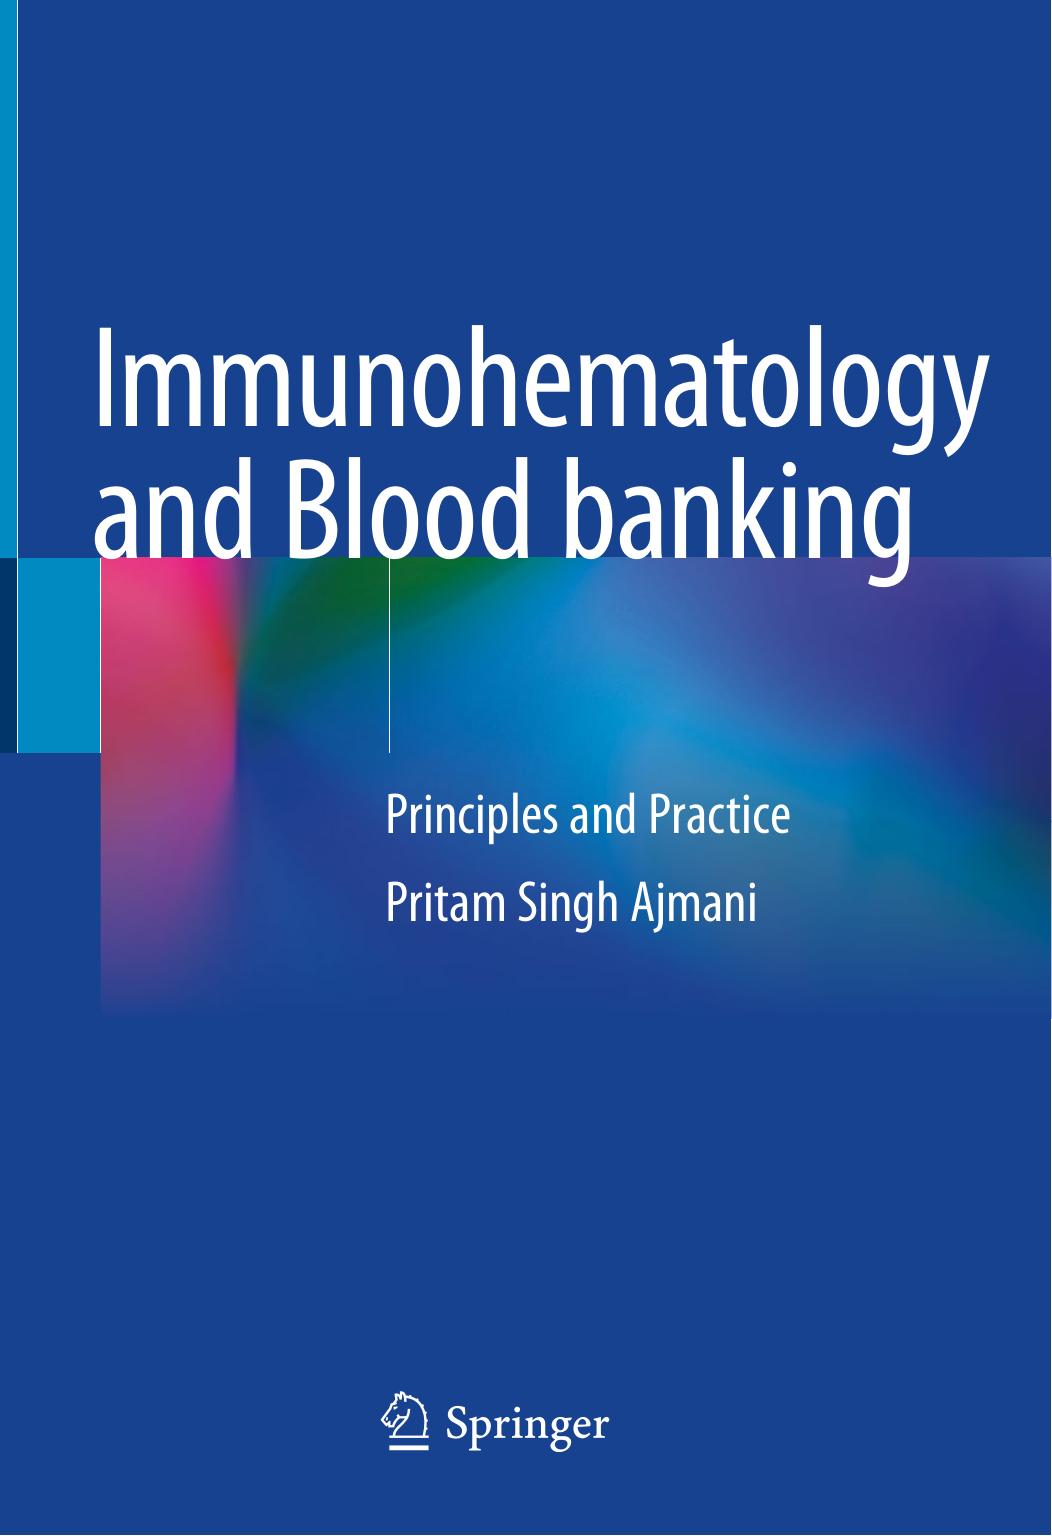 Immunohematology and Blood banking  Principles and Practice(2020)